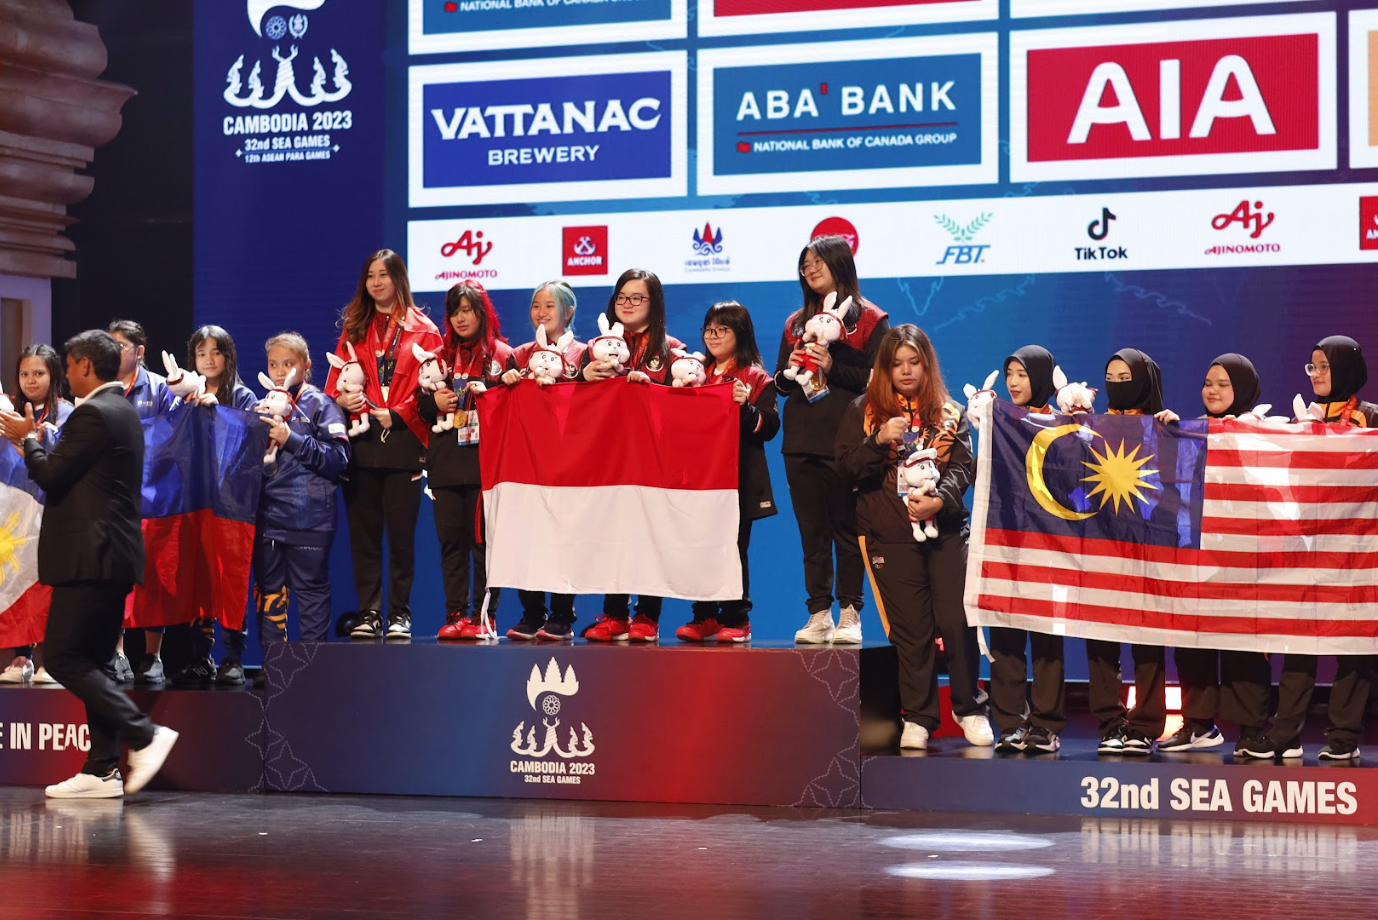 MDL Indonesia will Feature Women's Teams in Upcoming Professional Season